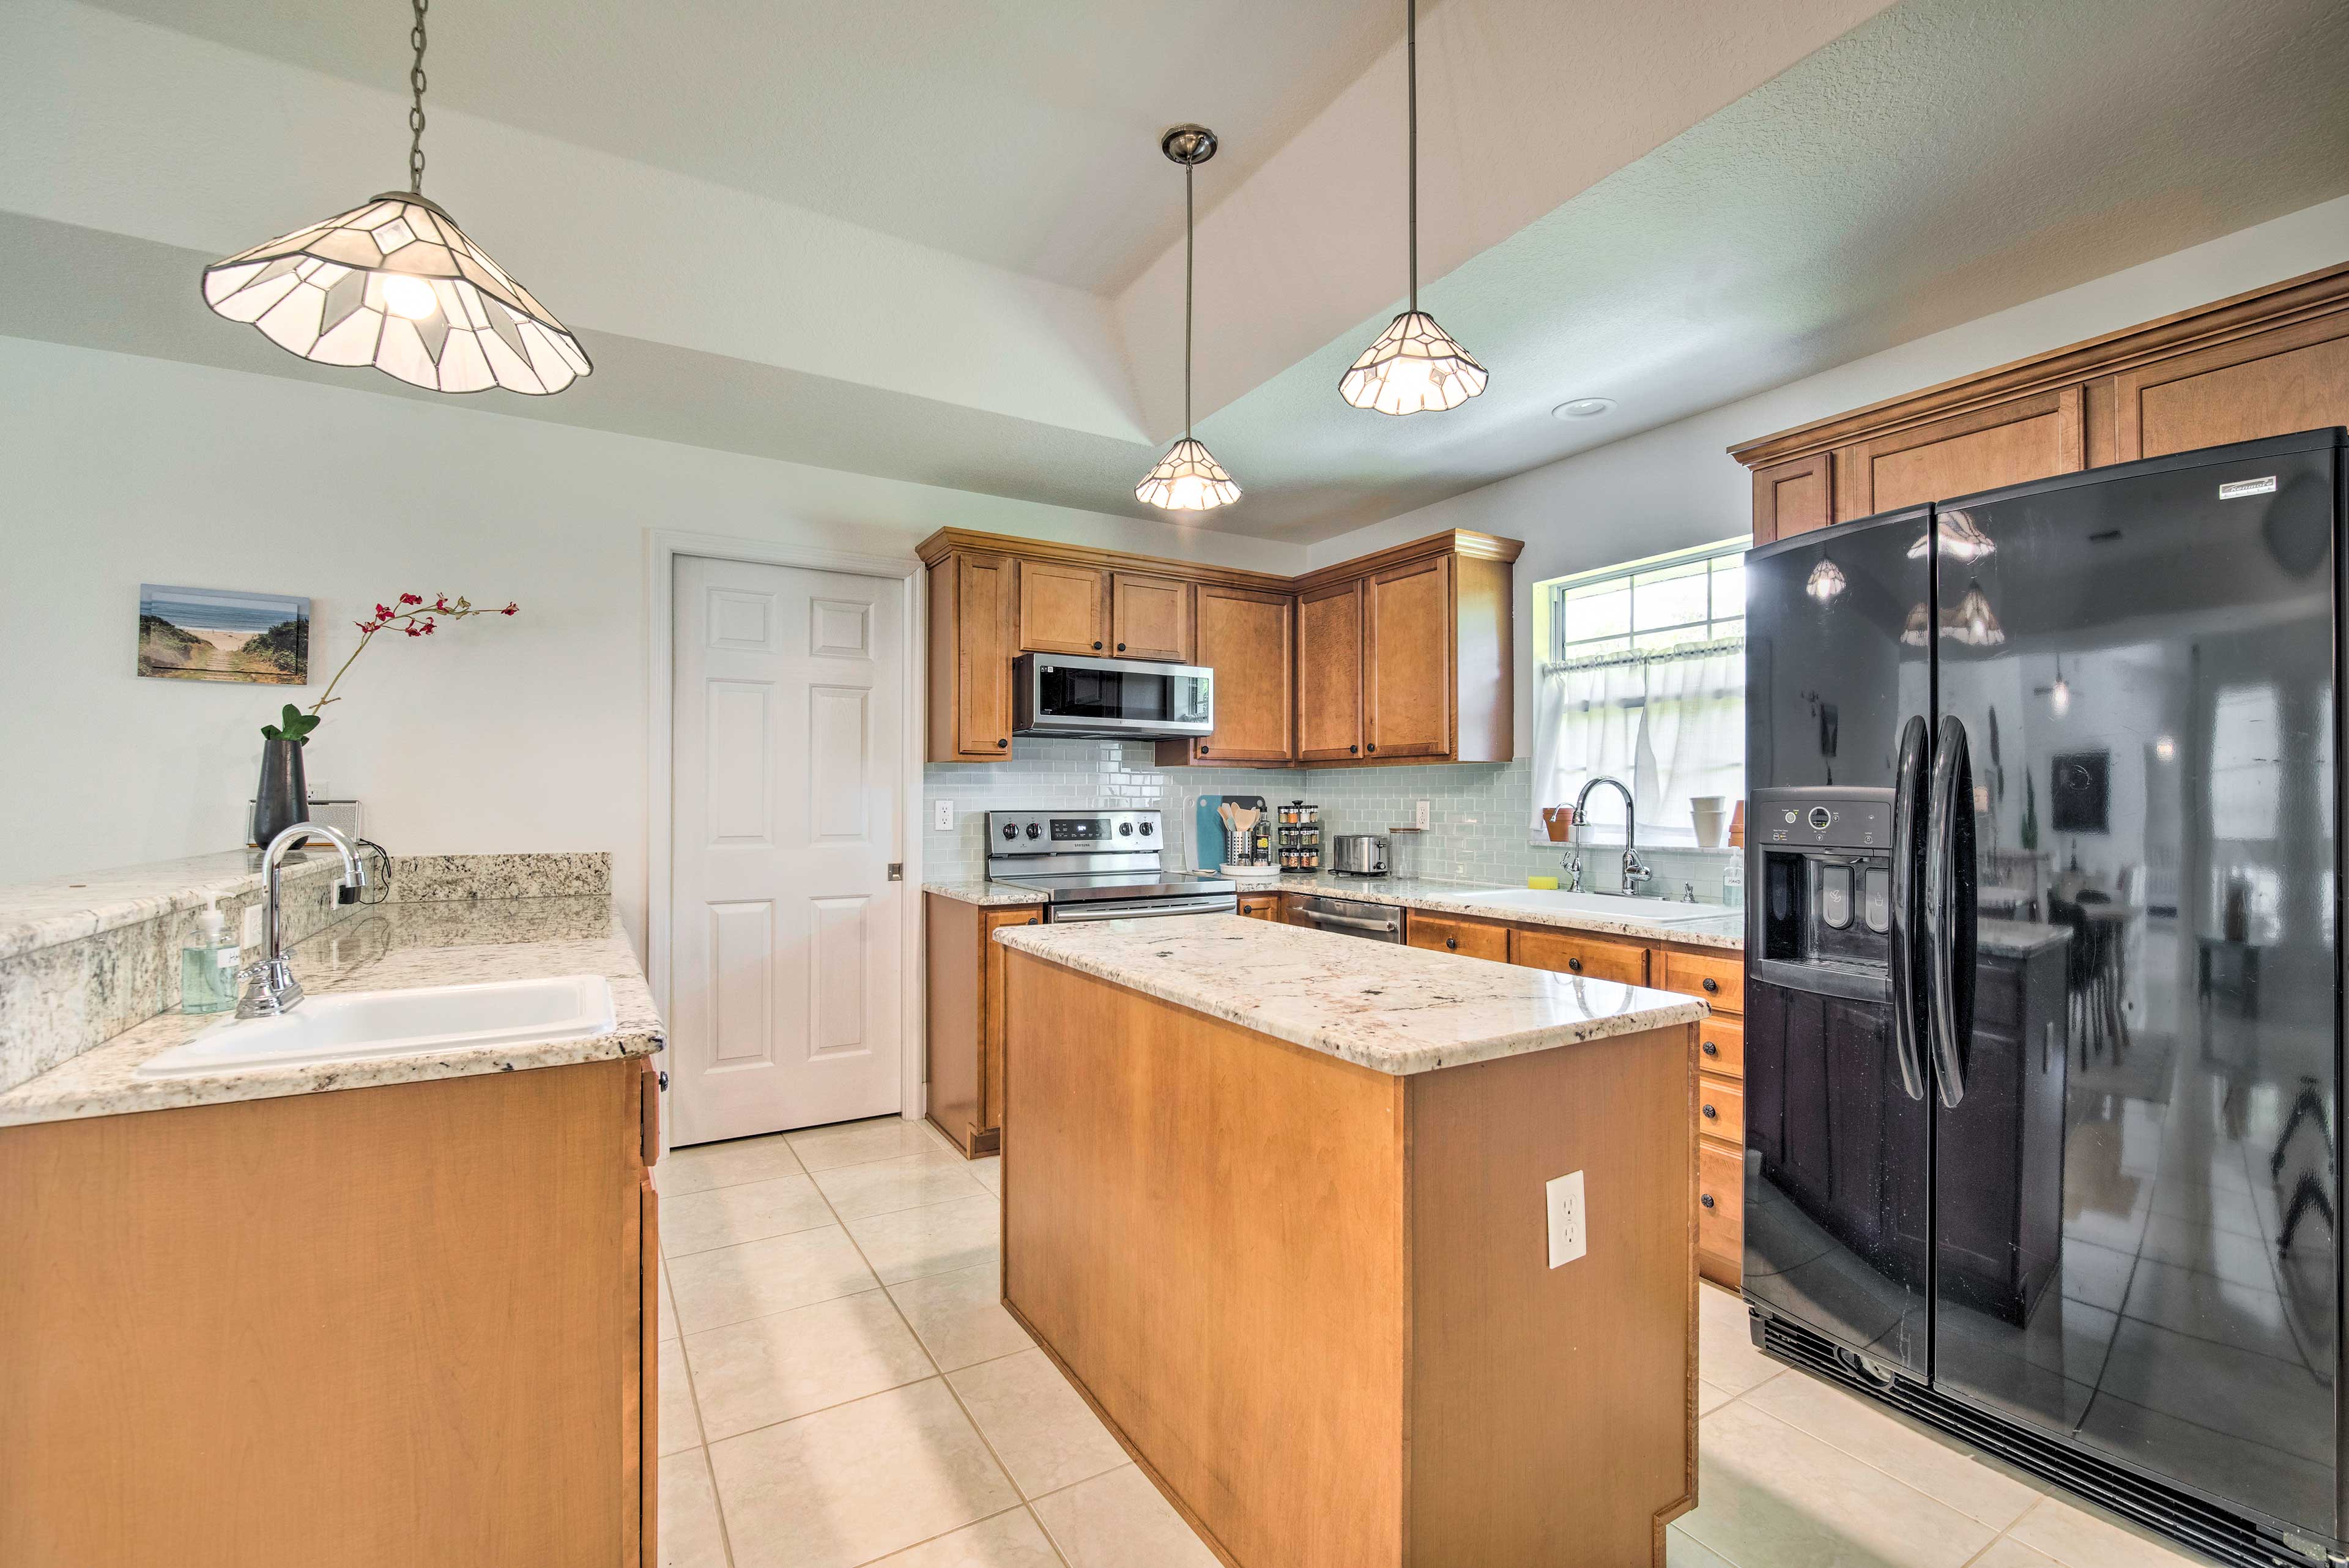 Kitchen | Fully Equipped | Coffee Maker | Toaster | Crockpot | Ice Maker